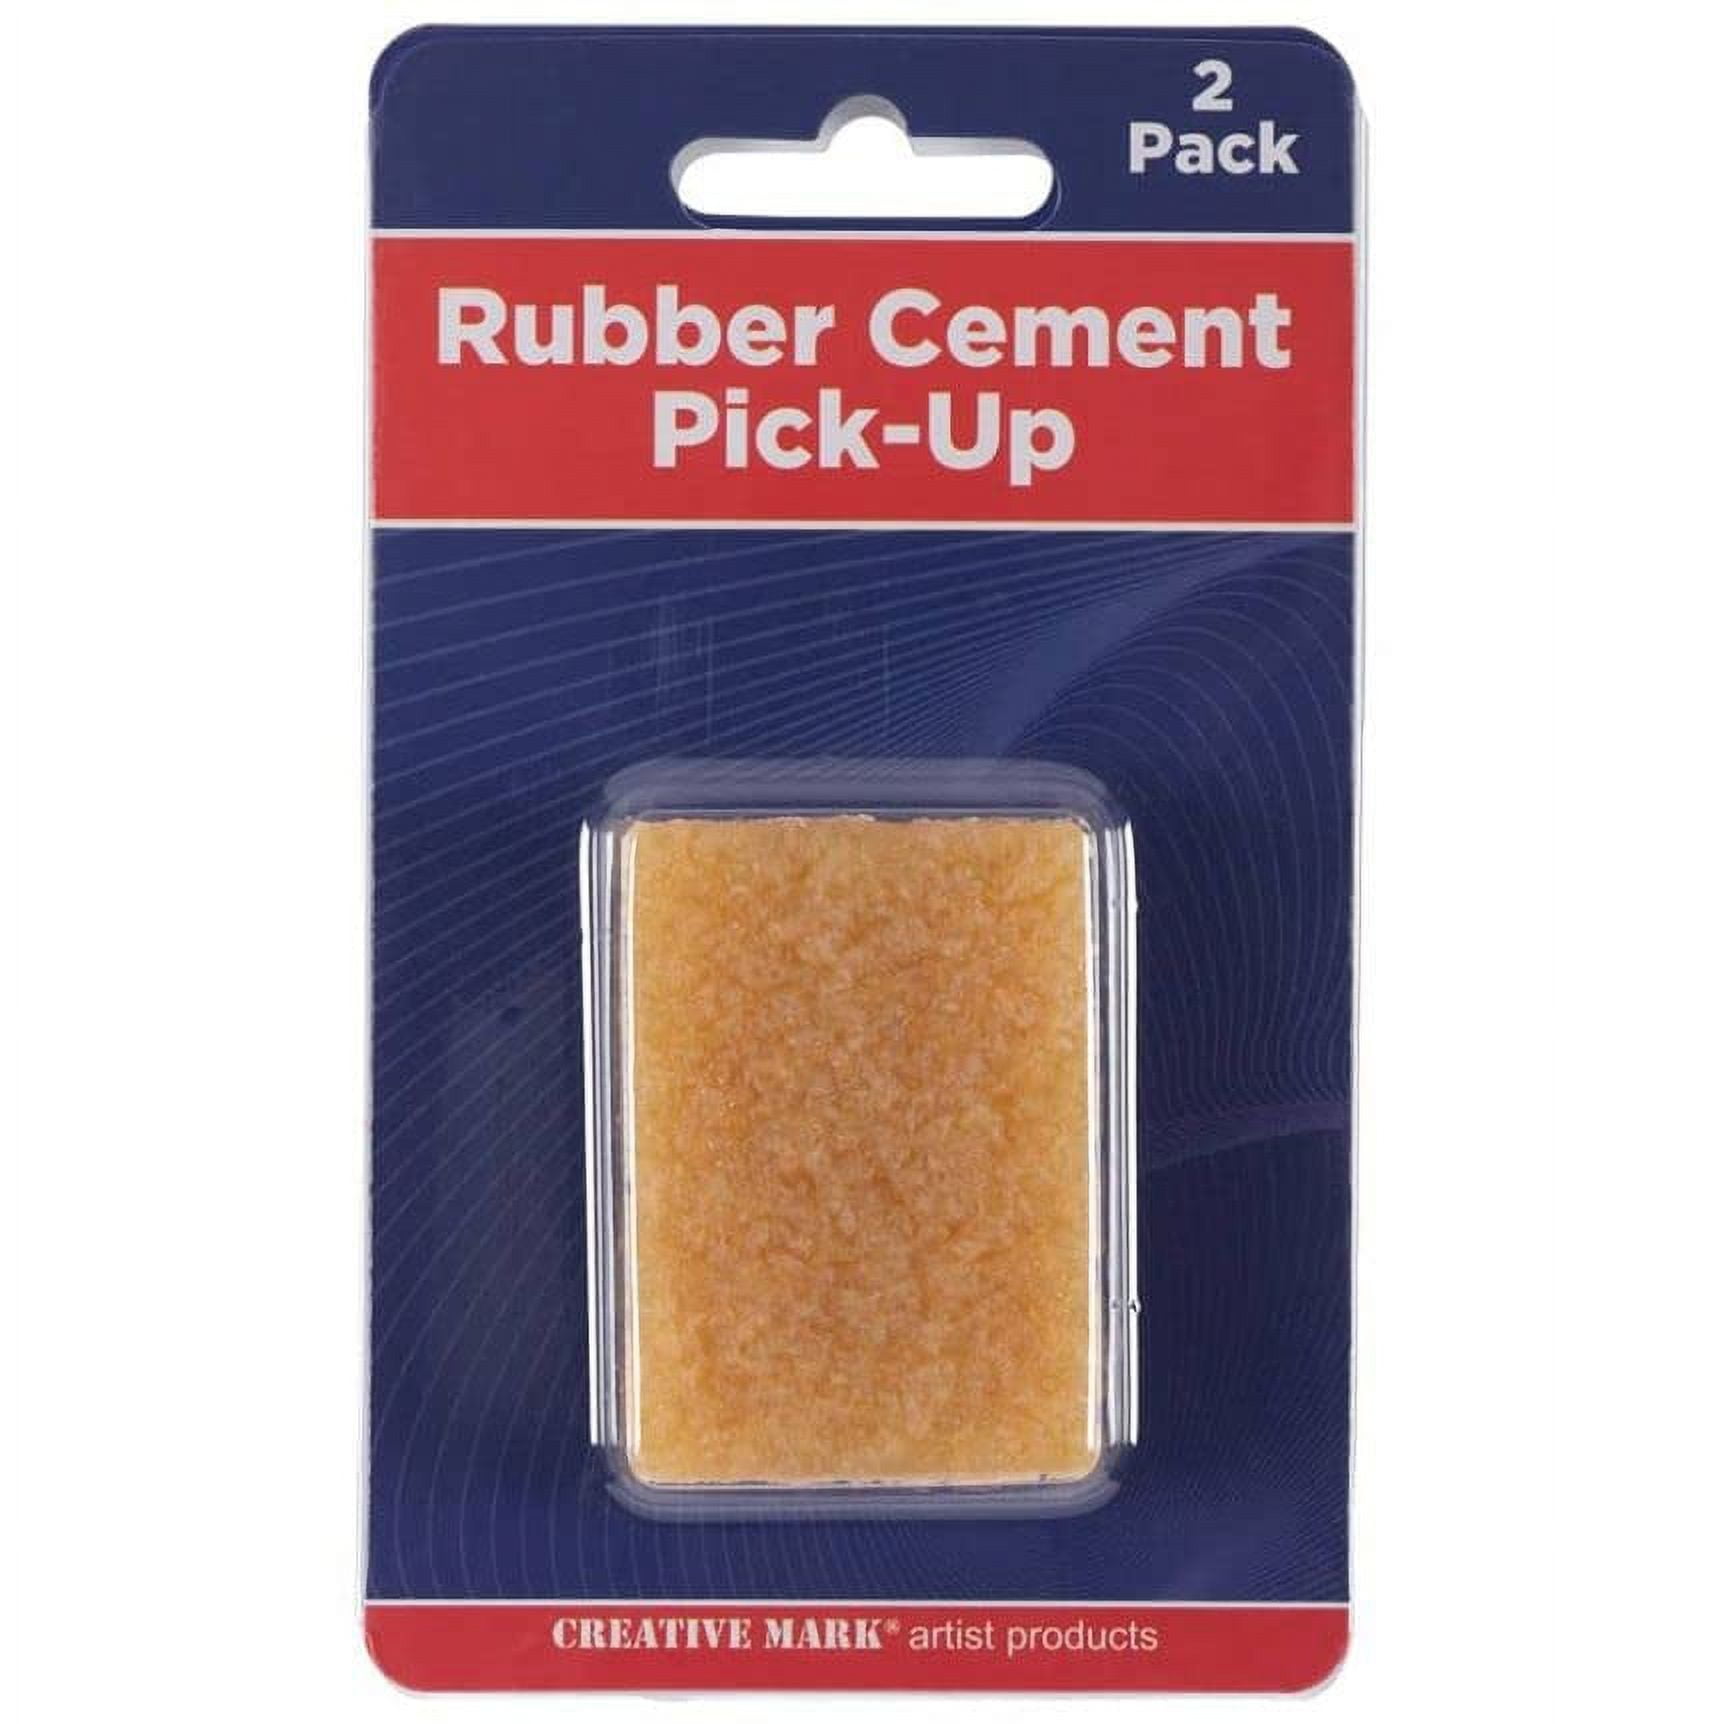  12 Pieces Glue Residue Pick up Eraser Rubber Cement